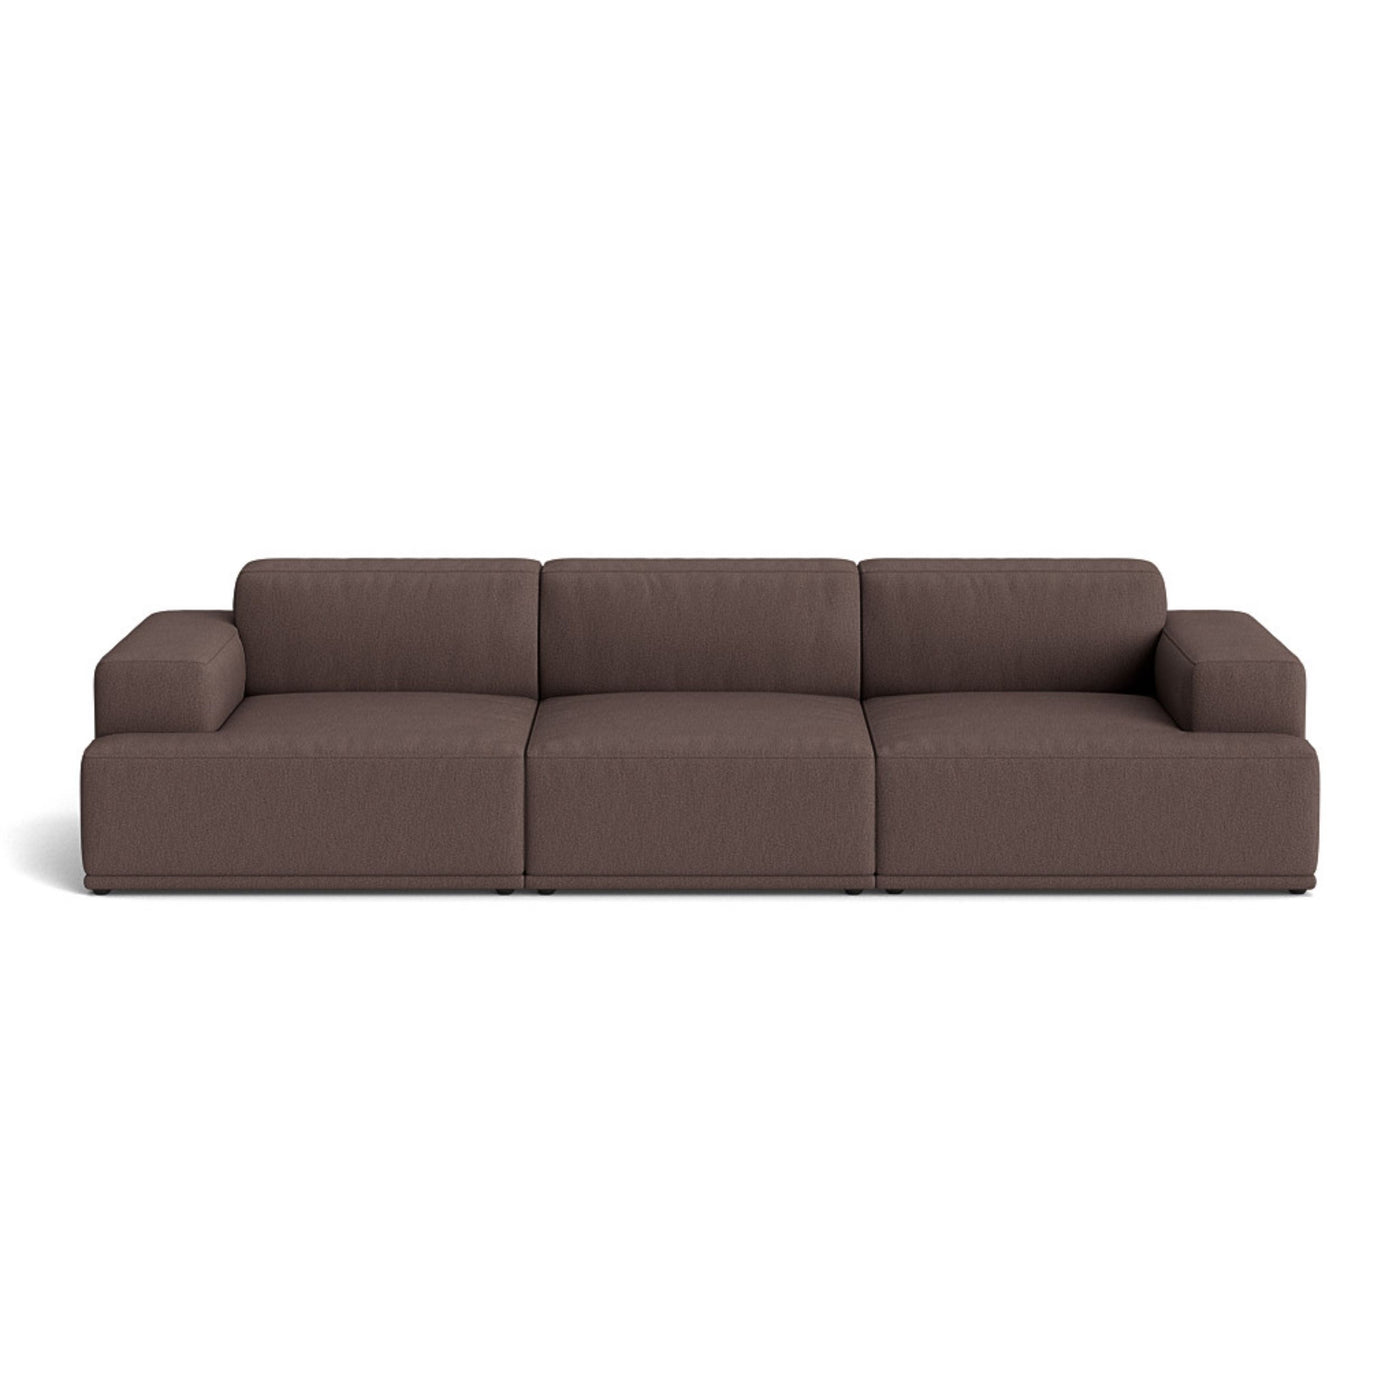 Muuto Connect Soft Modular 3 Seater Sofa, configuration 1. Made-to-order from someday designs. #colour_clay-6-red-brown